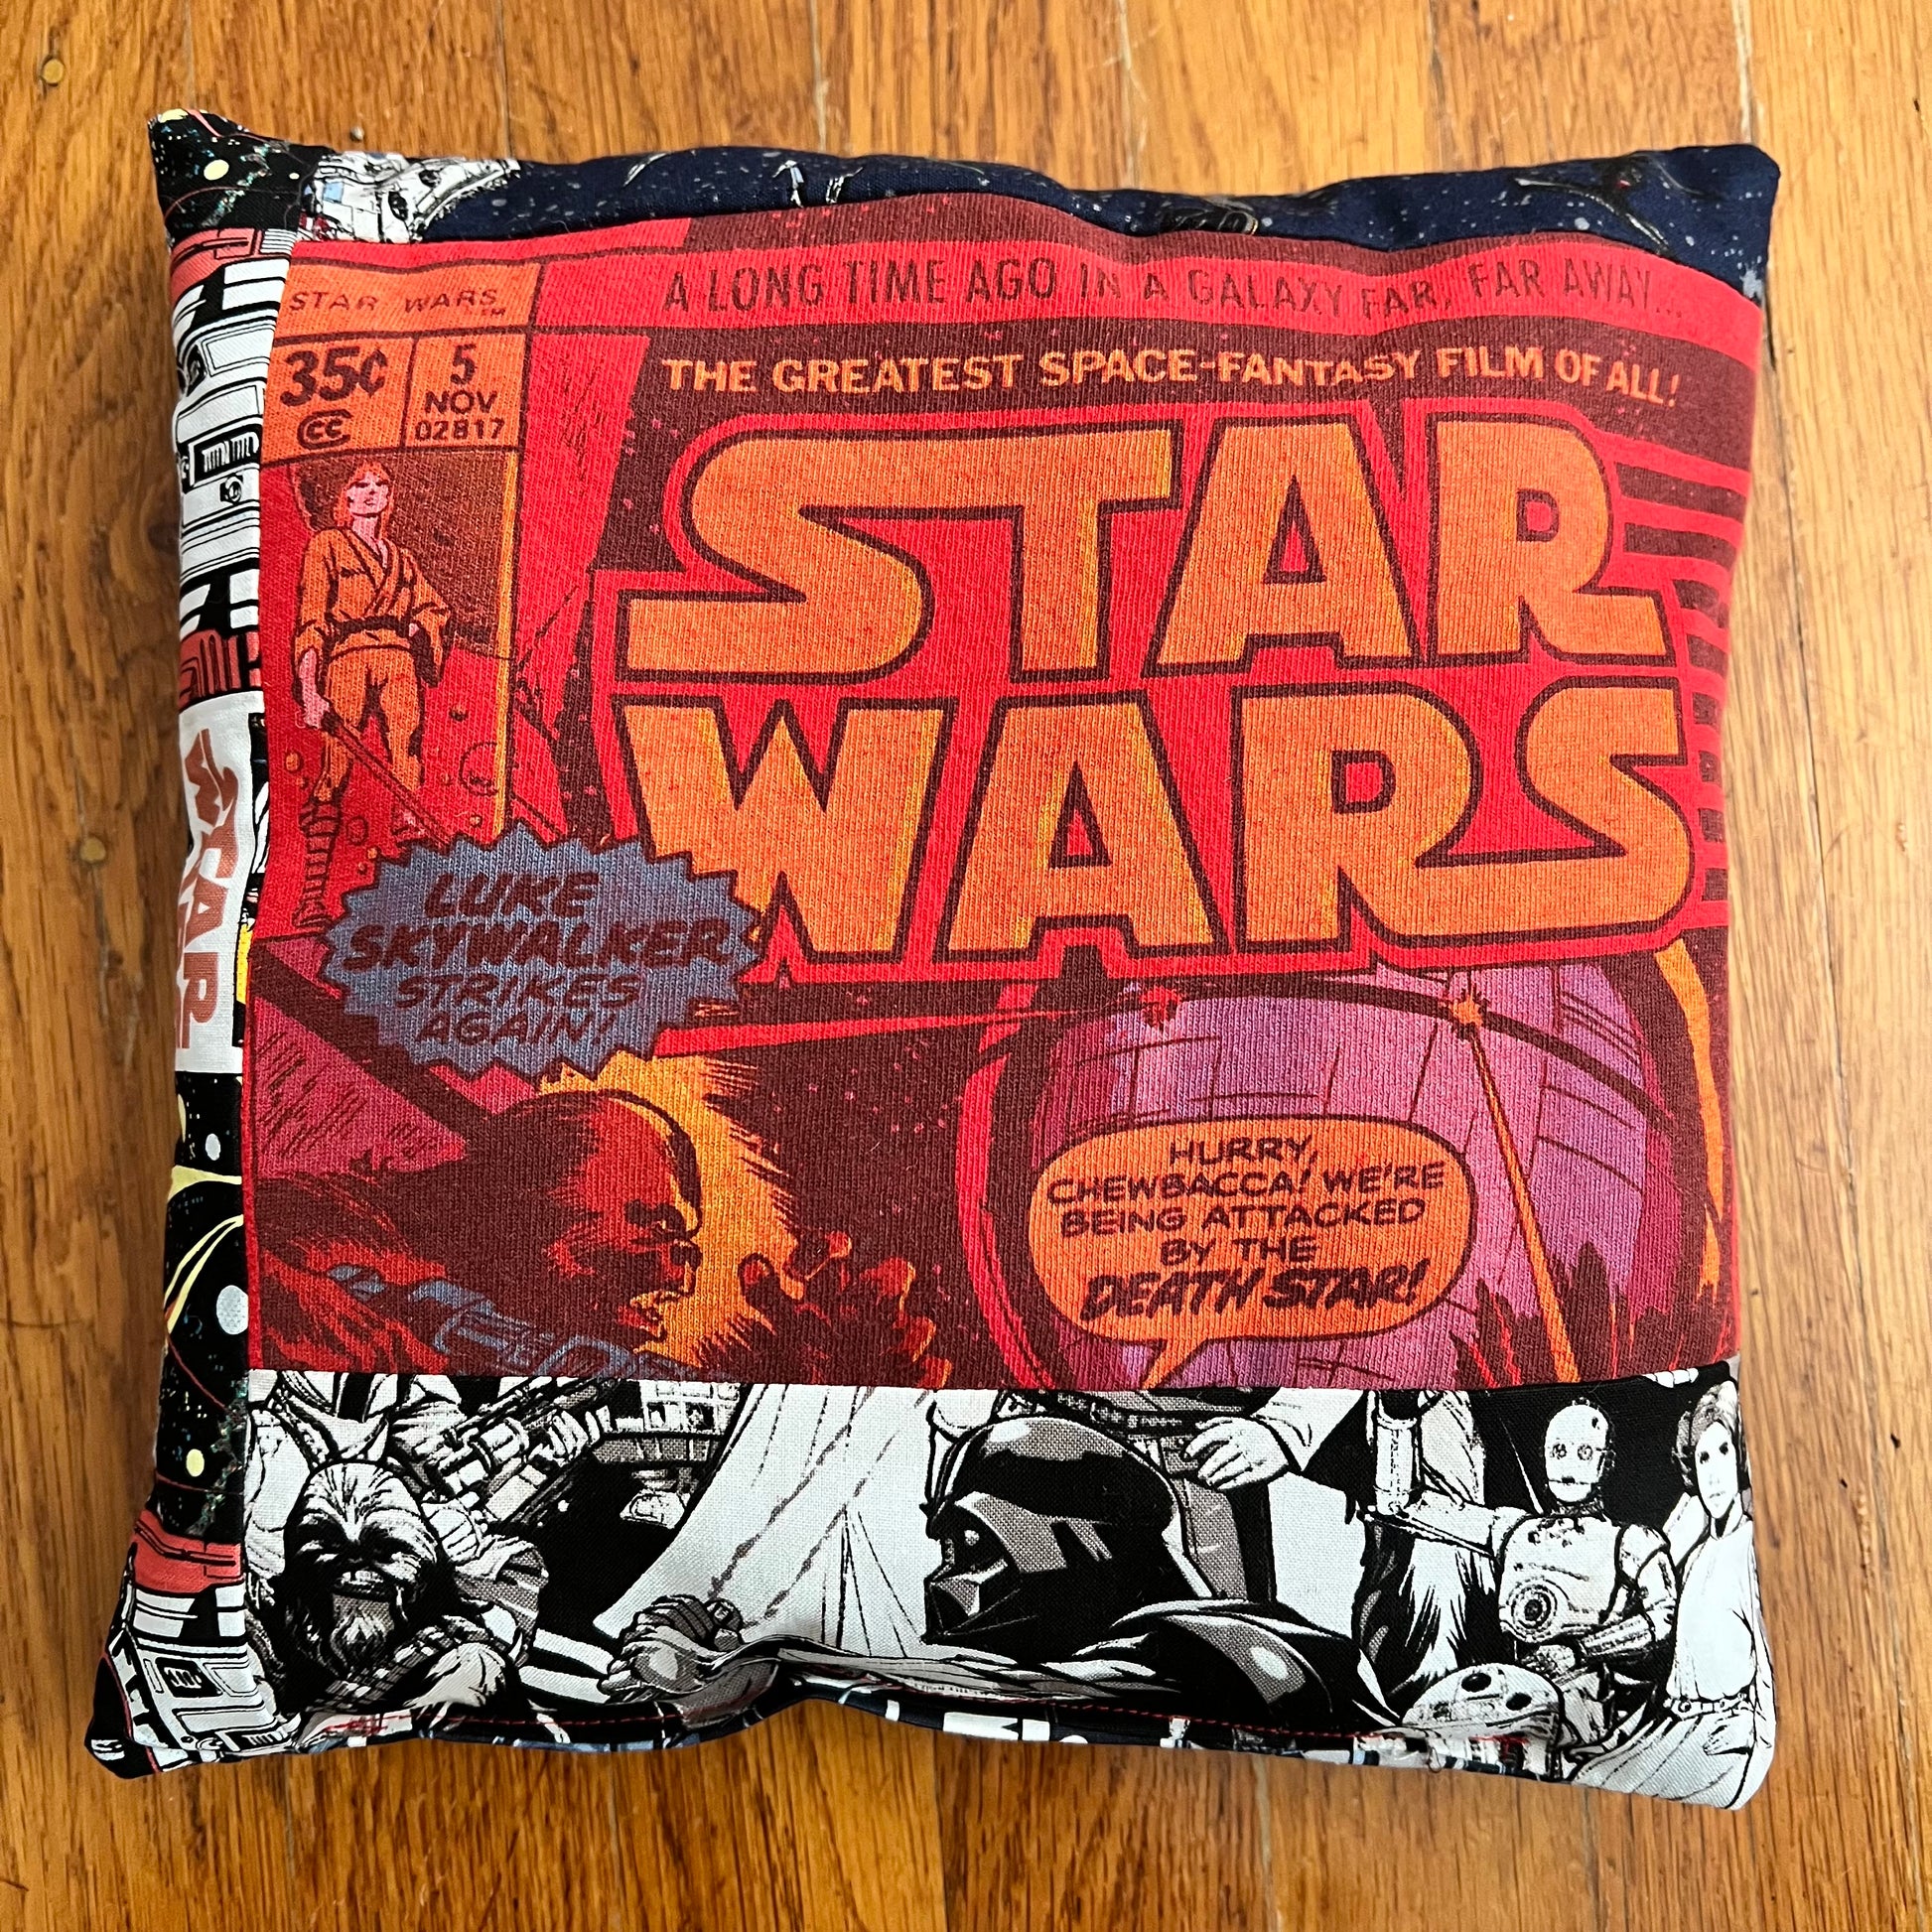 A little accent pillow. Star wars  comic on a red tshirt, with cotton star warss collage print fabric around edges